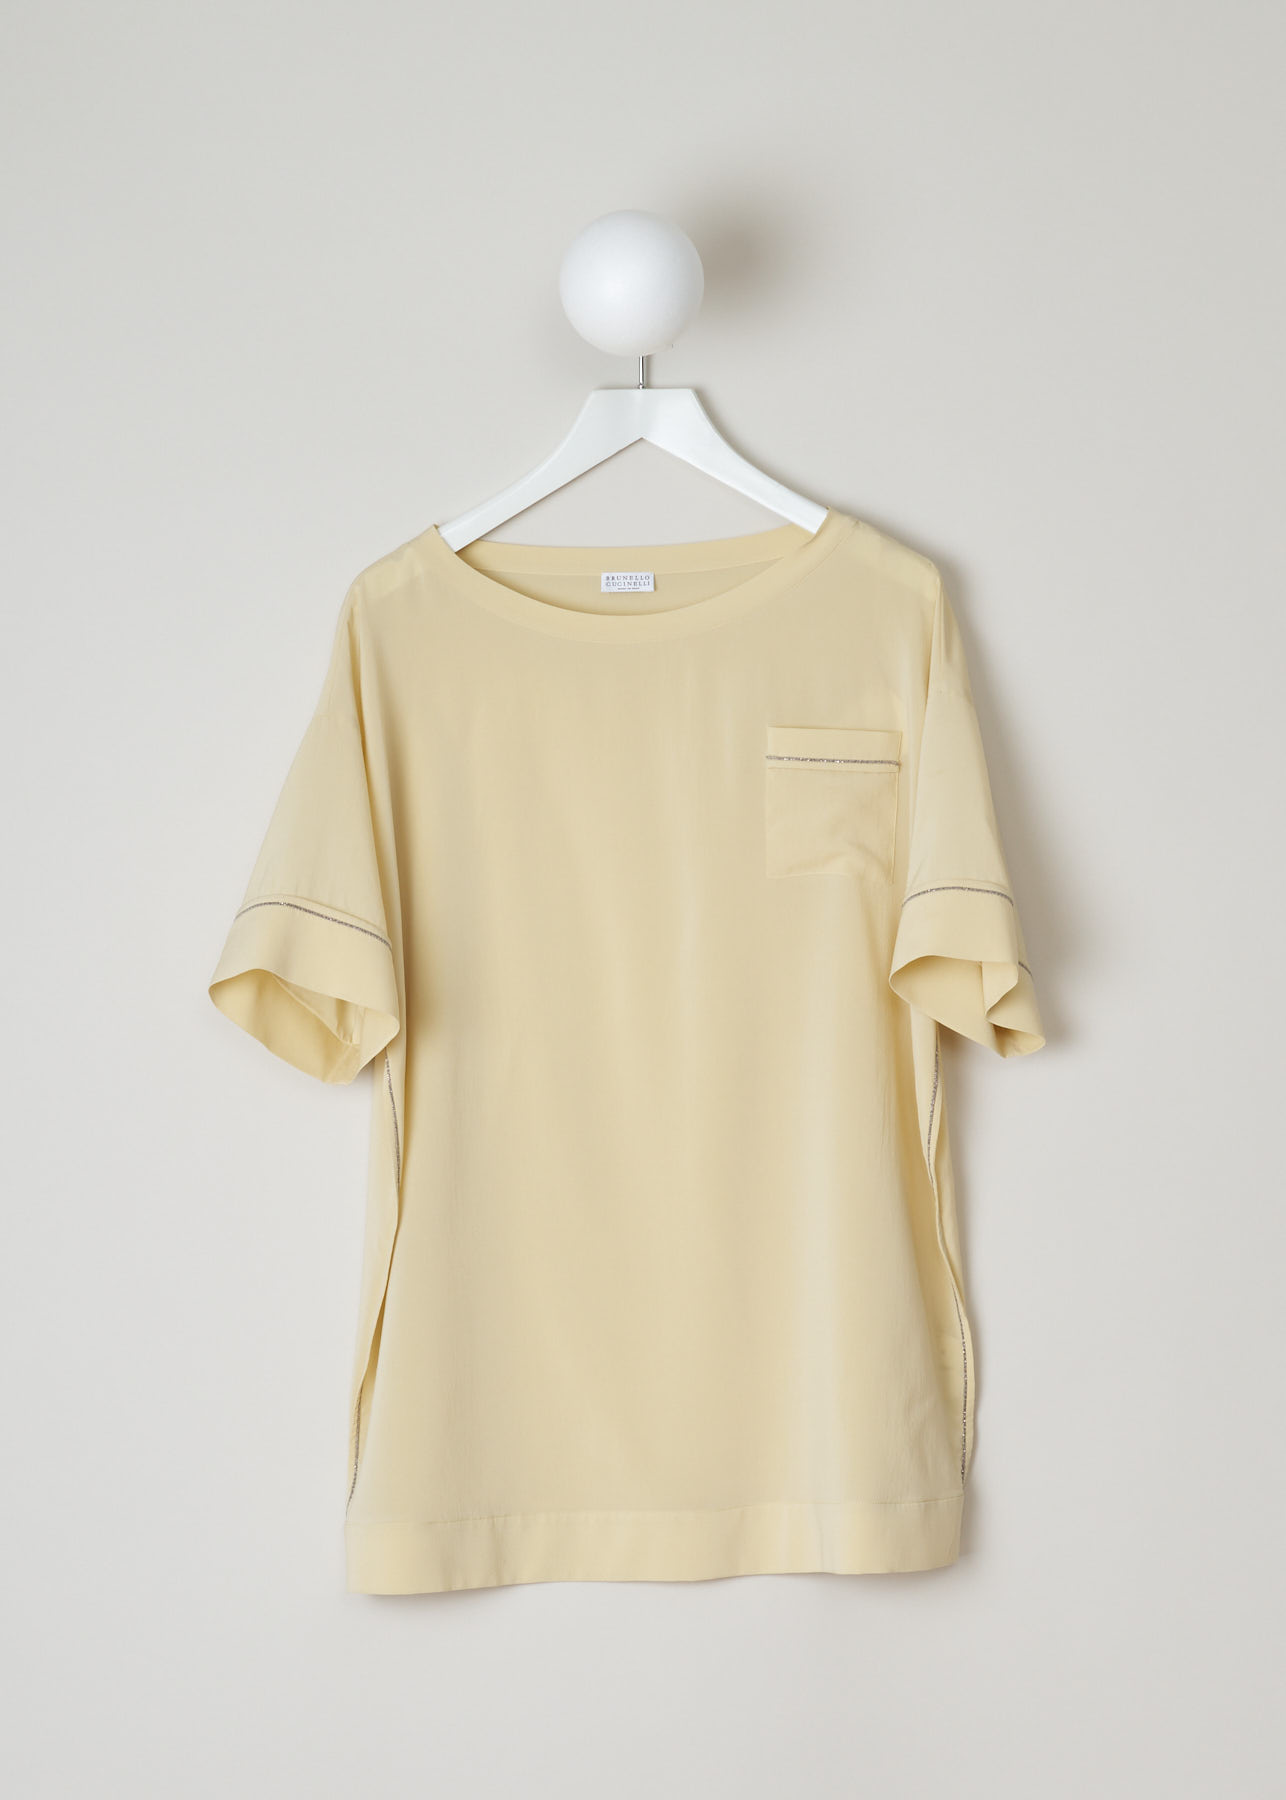 Brunello Cucinelli, 
Silk boxy t-shirt,
M0S28B7108_CF013,front,Oversized fluid silk crepe de Chine t-shirt top. With monili sparkle detail on the left pocket, short sleeves and side seams.